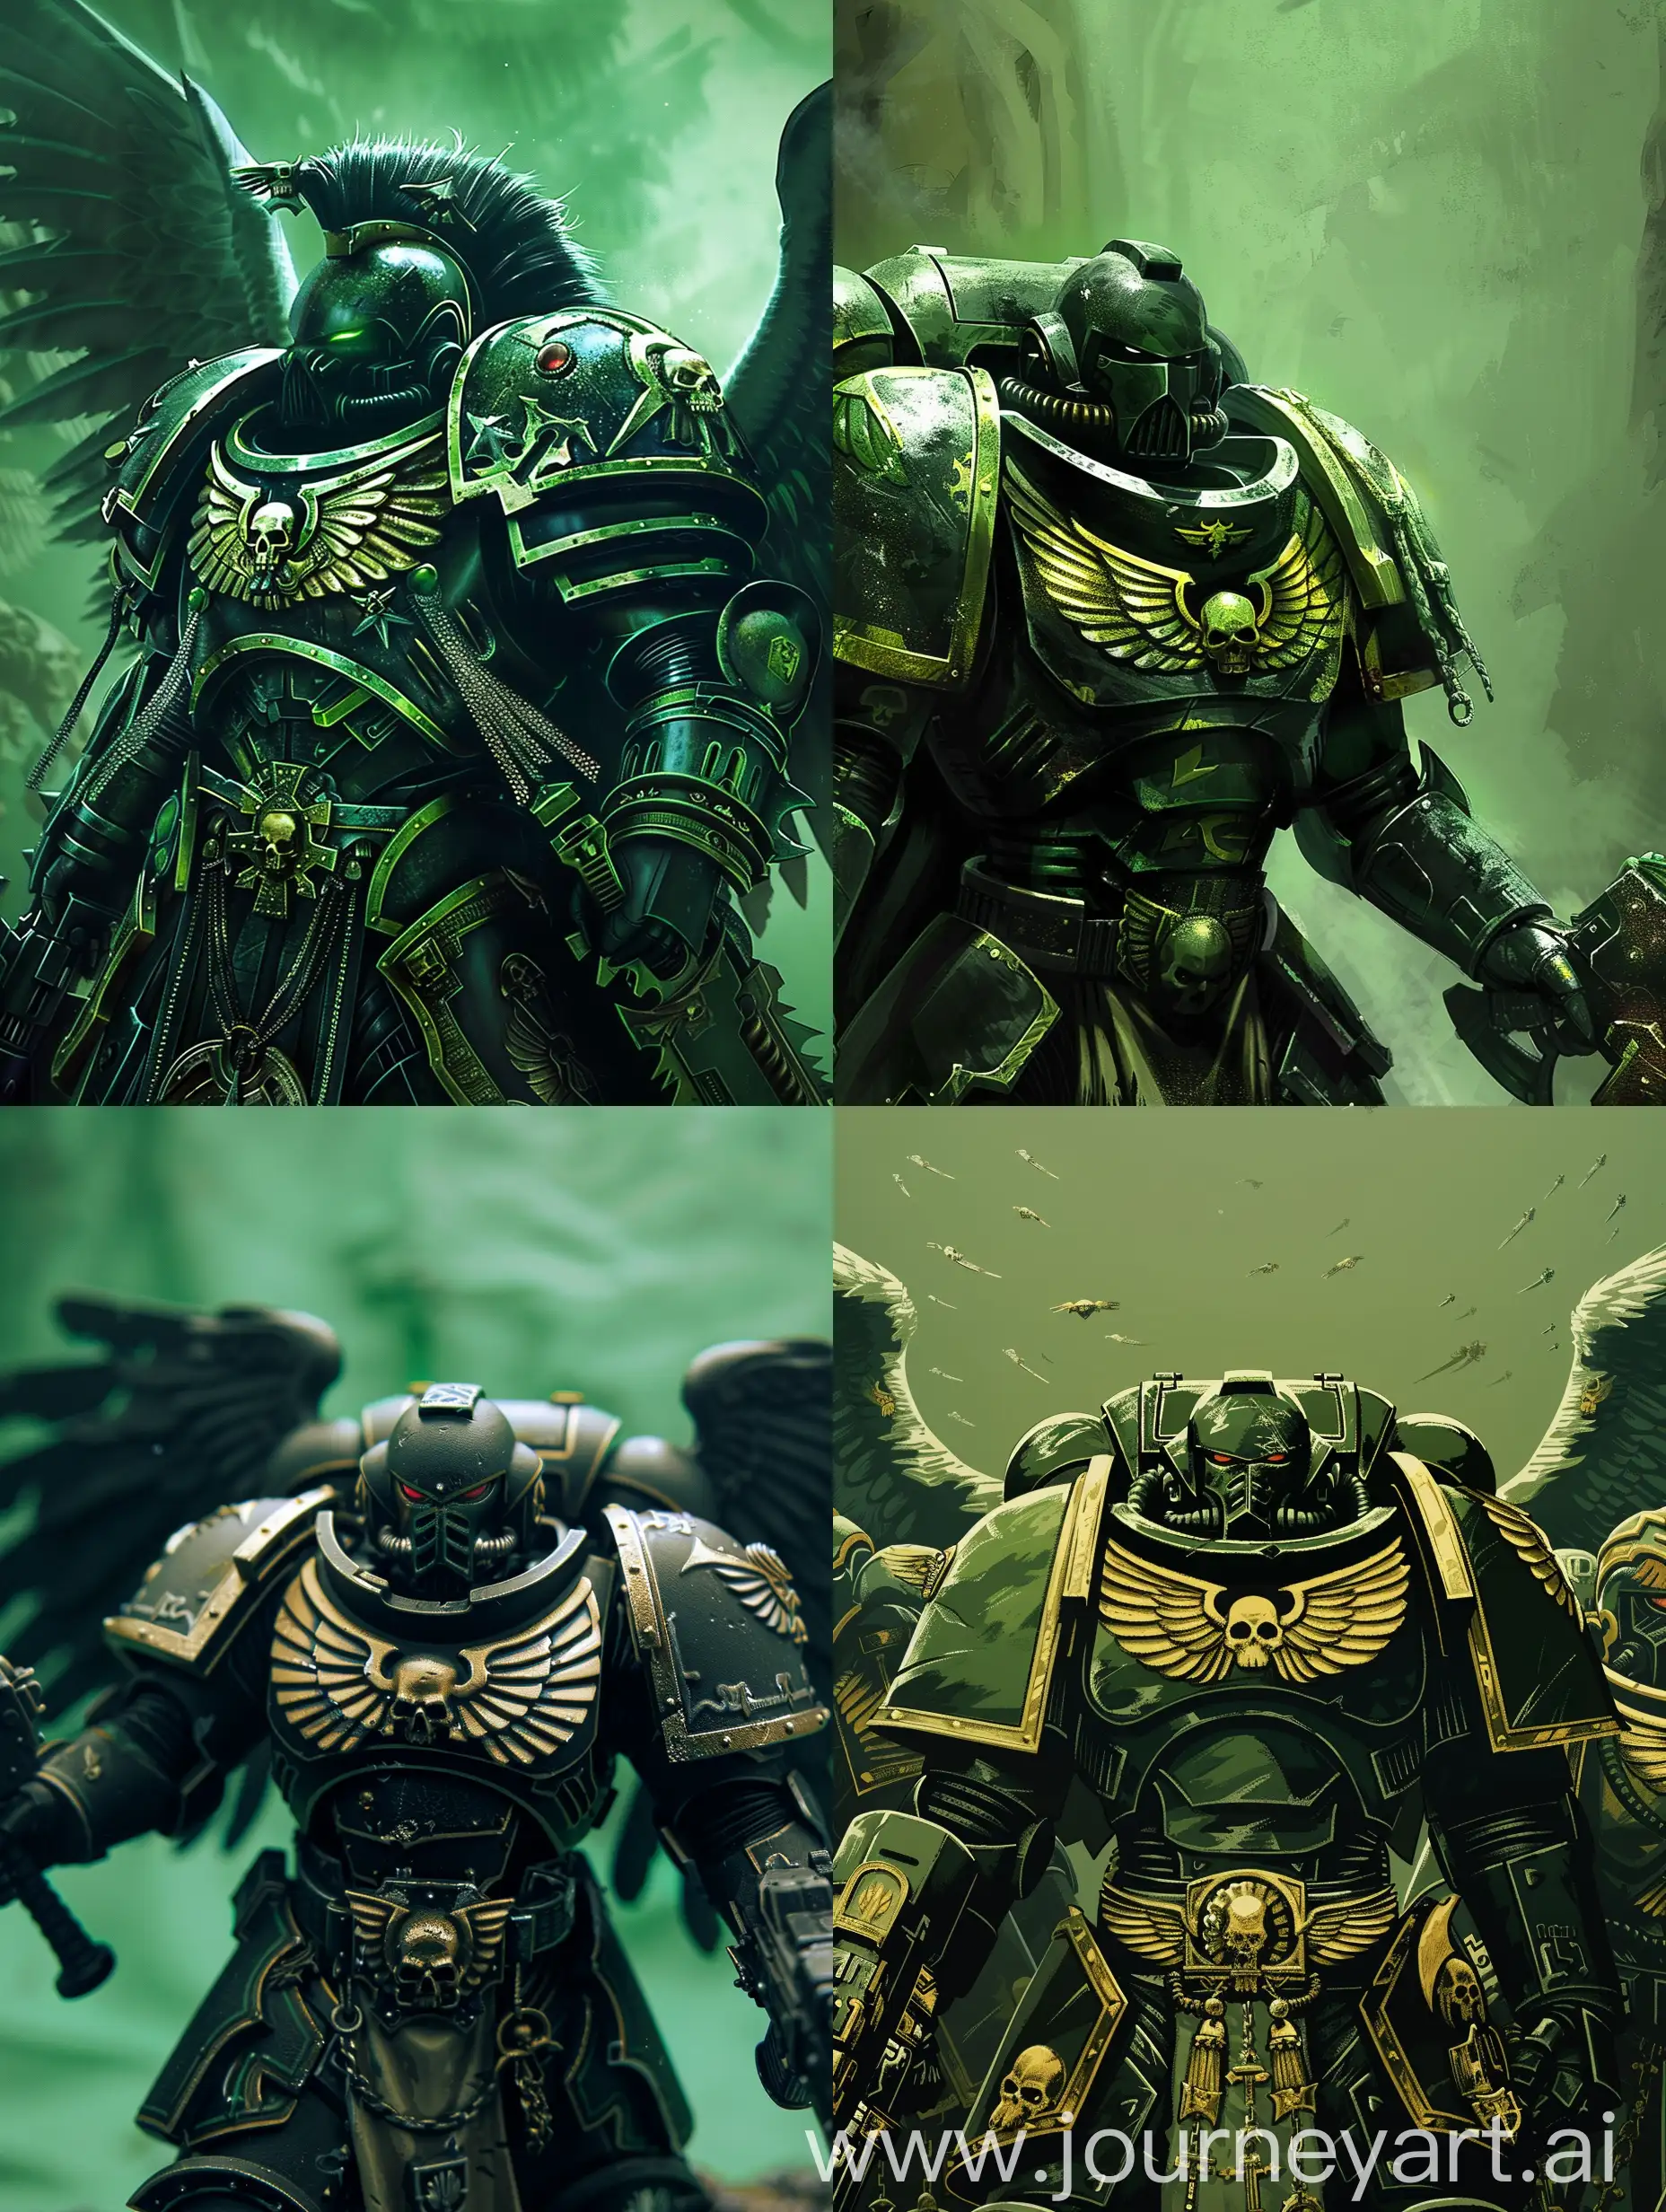 The Dark Angels from the Warhammer 40k universe. The background is green. 